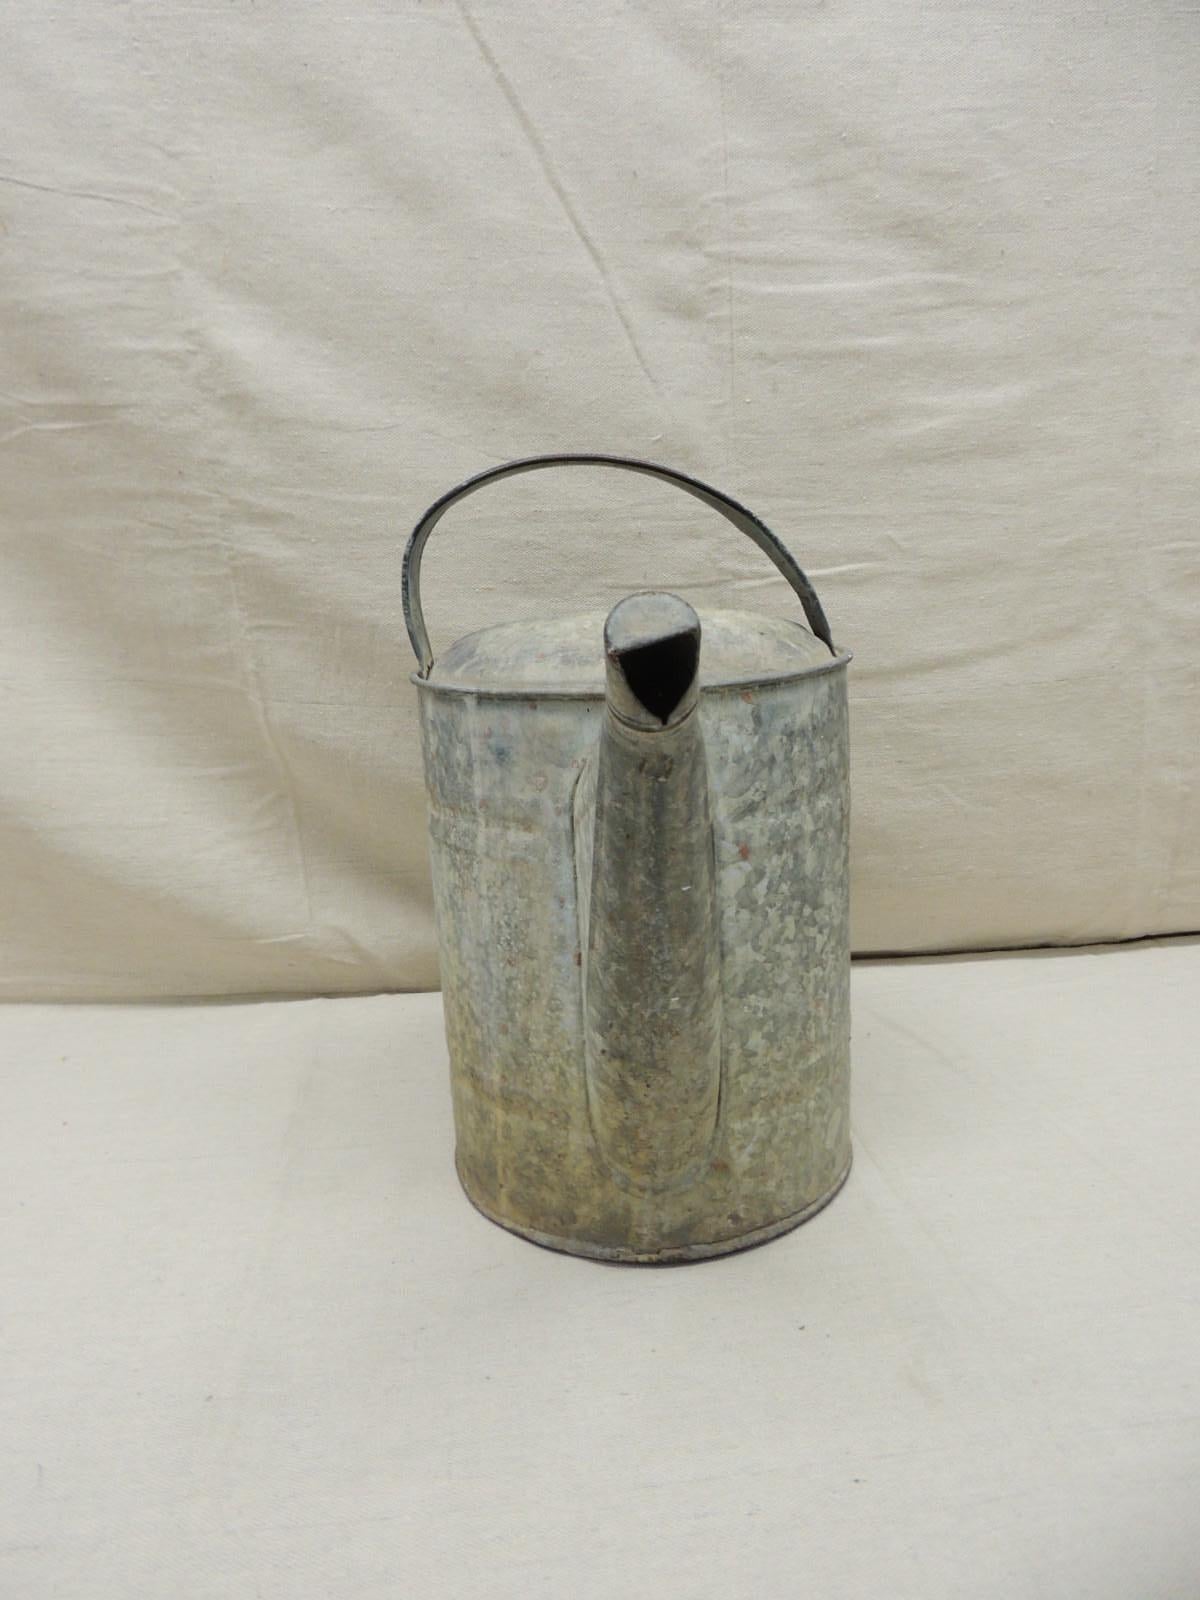 Vintage Galvanized garden watering can
Weathered finish 
Does not hold water. For decorative purposes only
India 1990's
Rustic style.